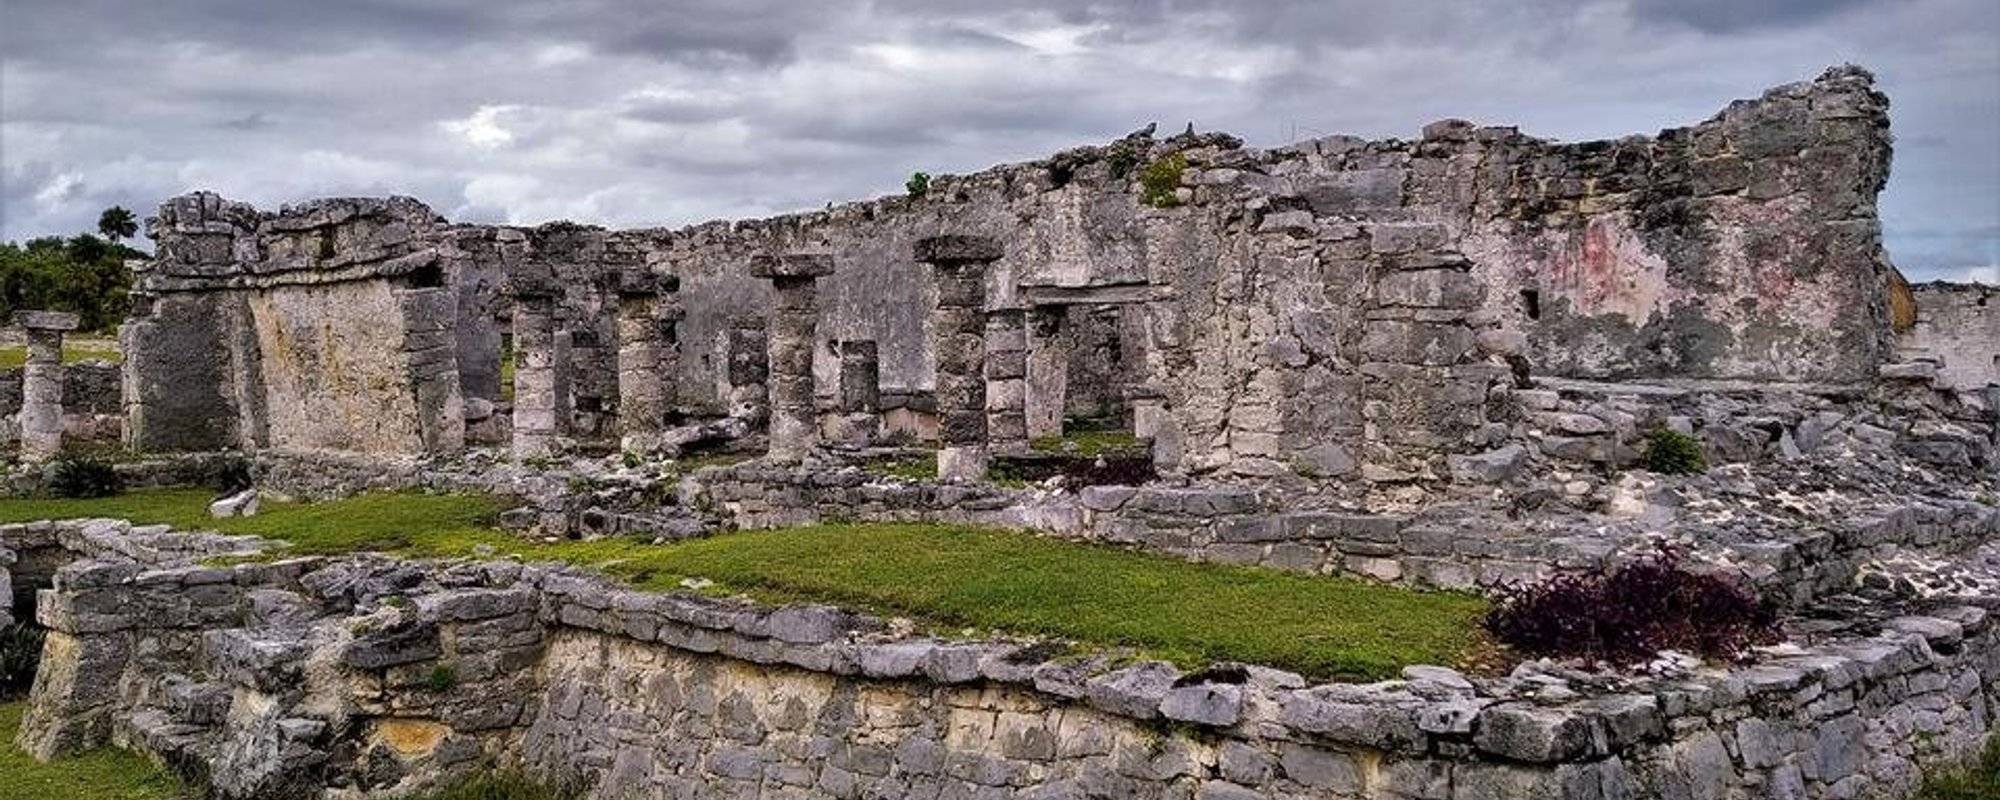 Mysterious Yucatan: Tulum Ruins covered with clouds